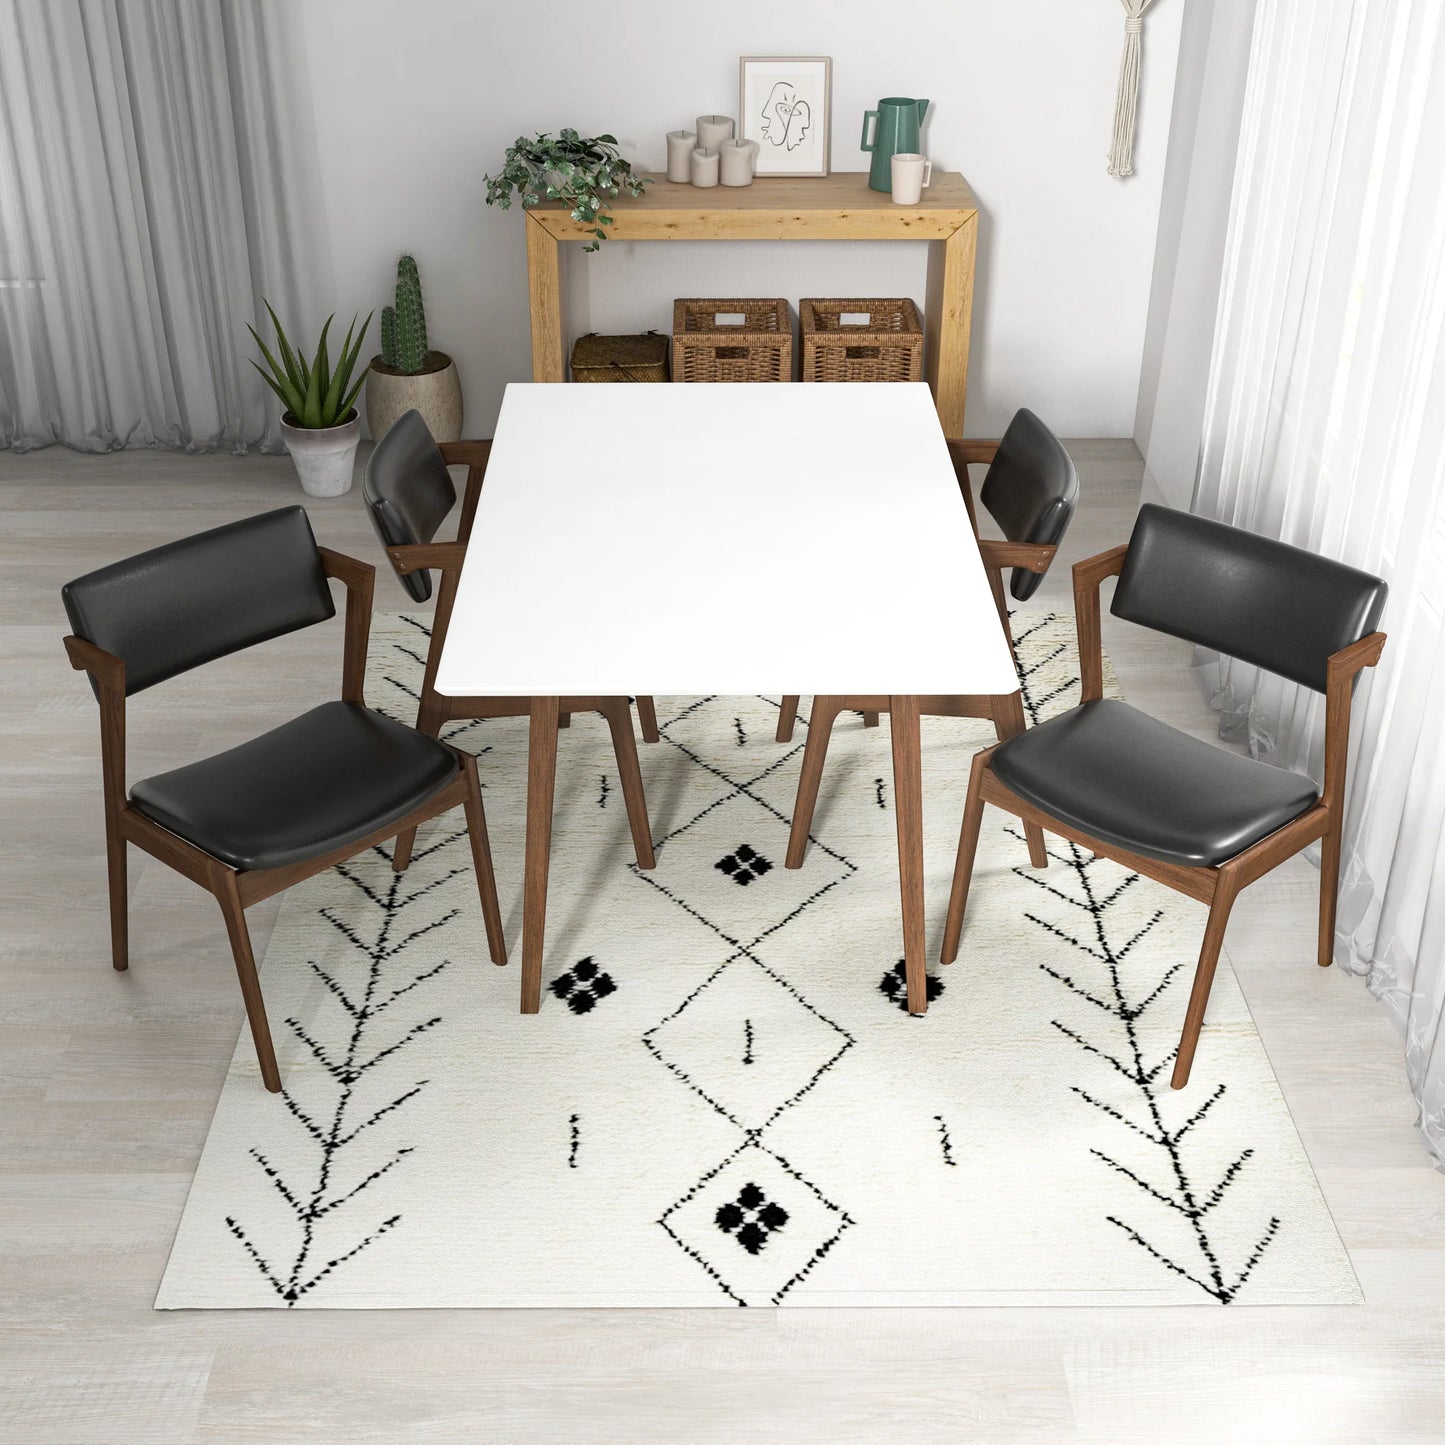 Adira (Small - White) Dining Set with 4 Ricco (Black Leather) Dining Chairs